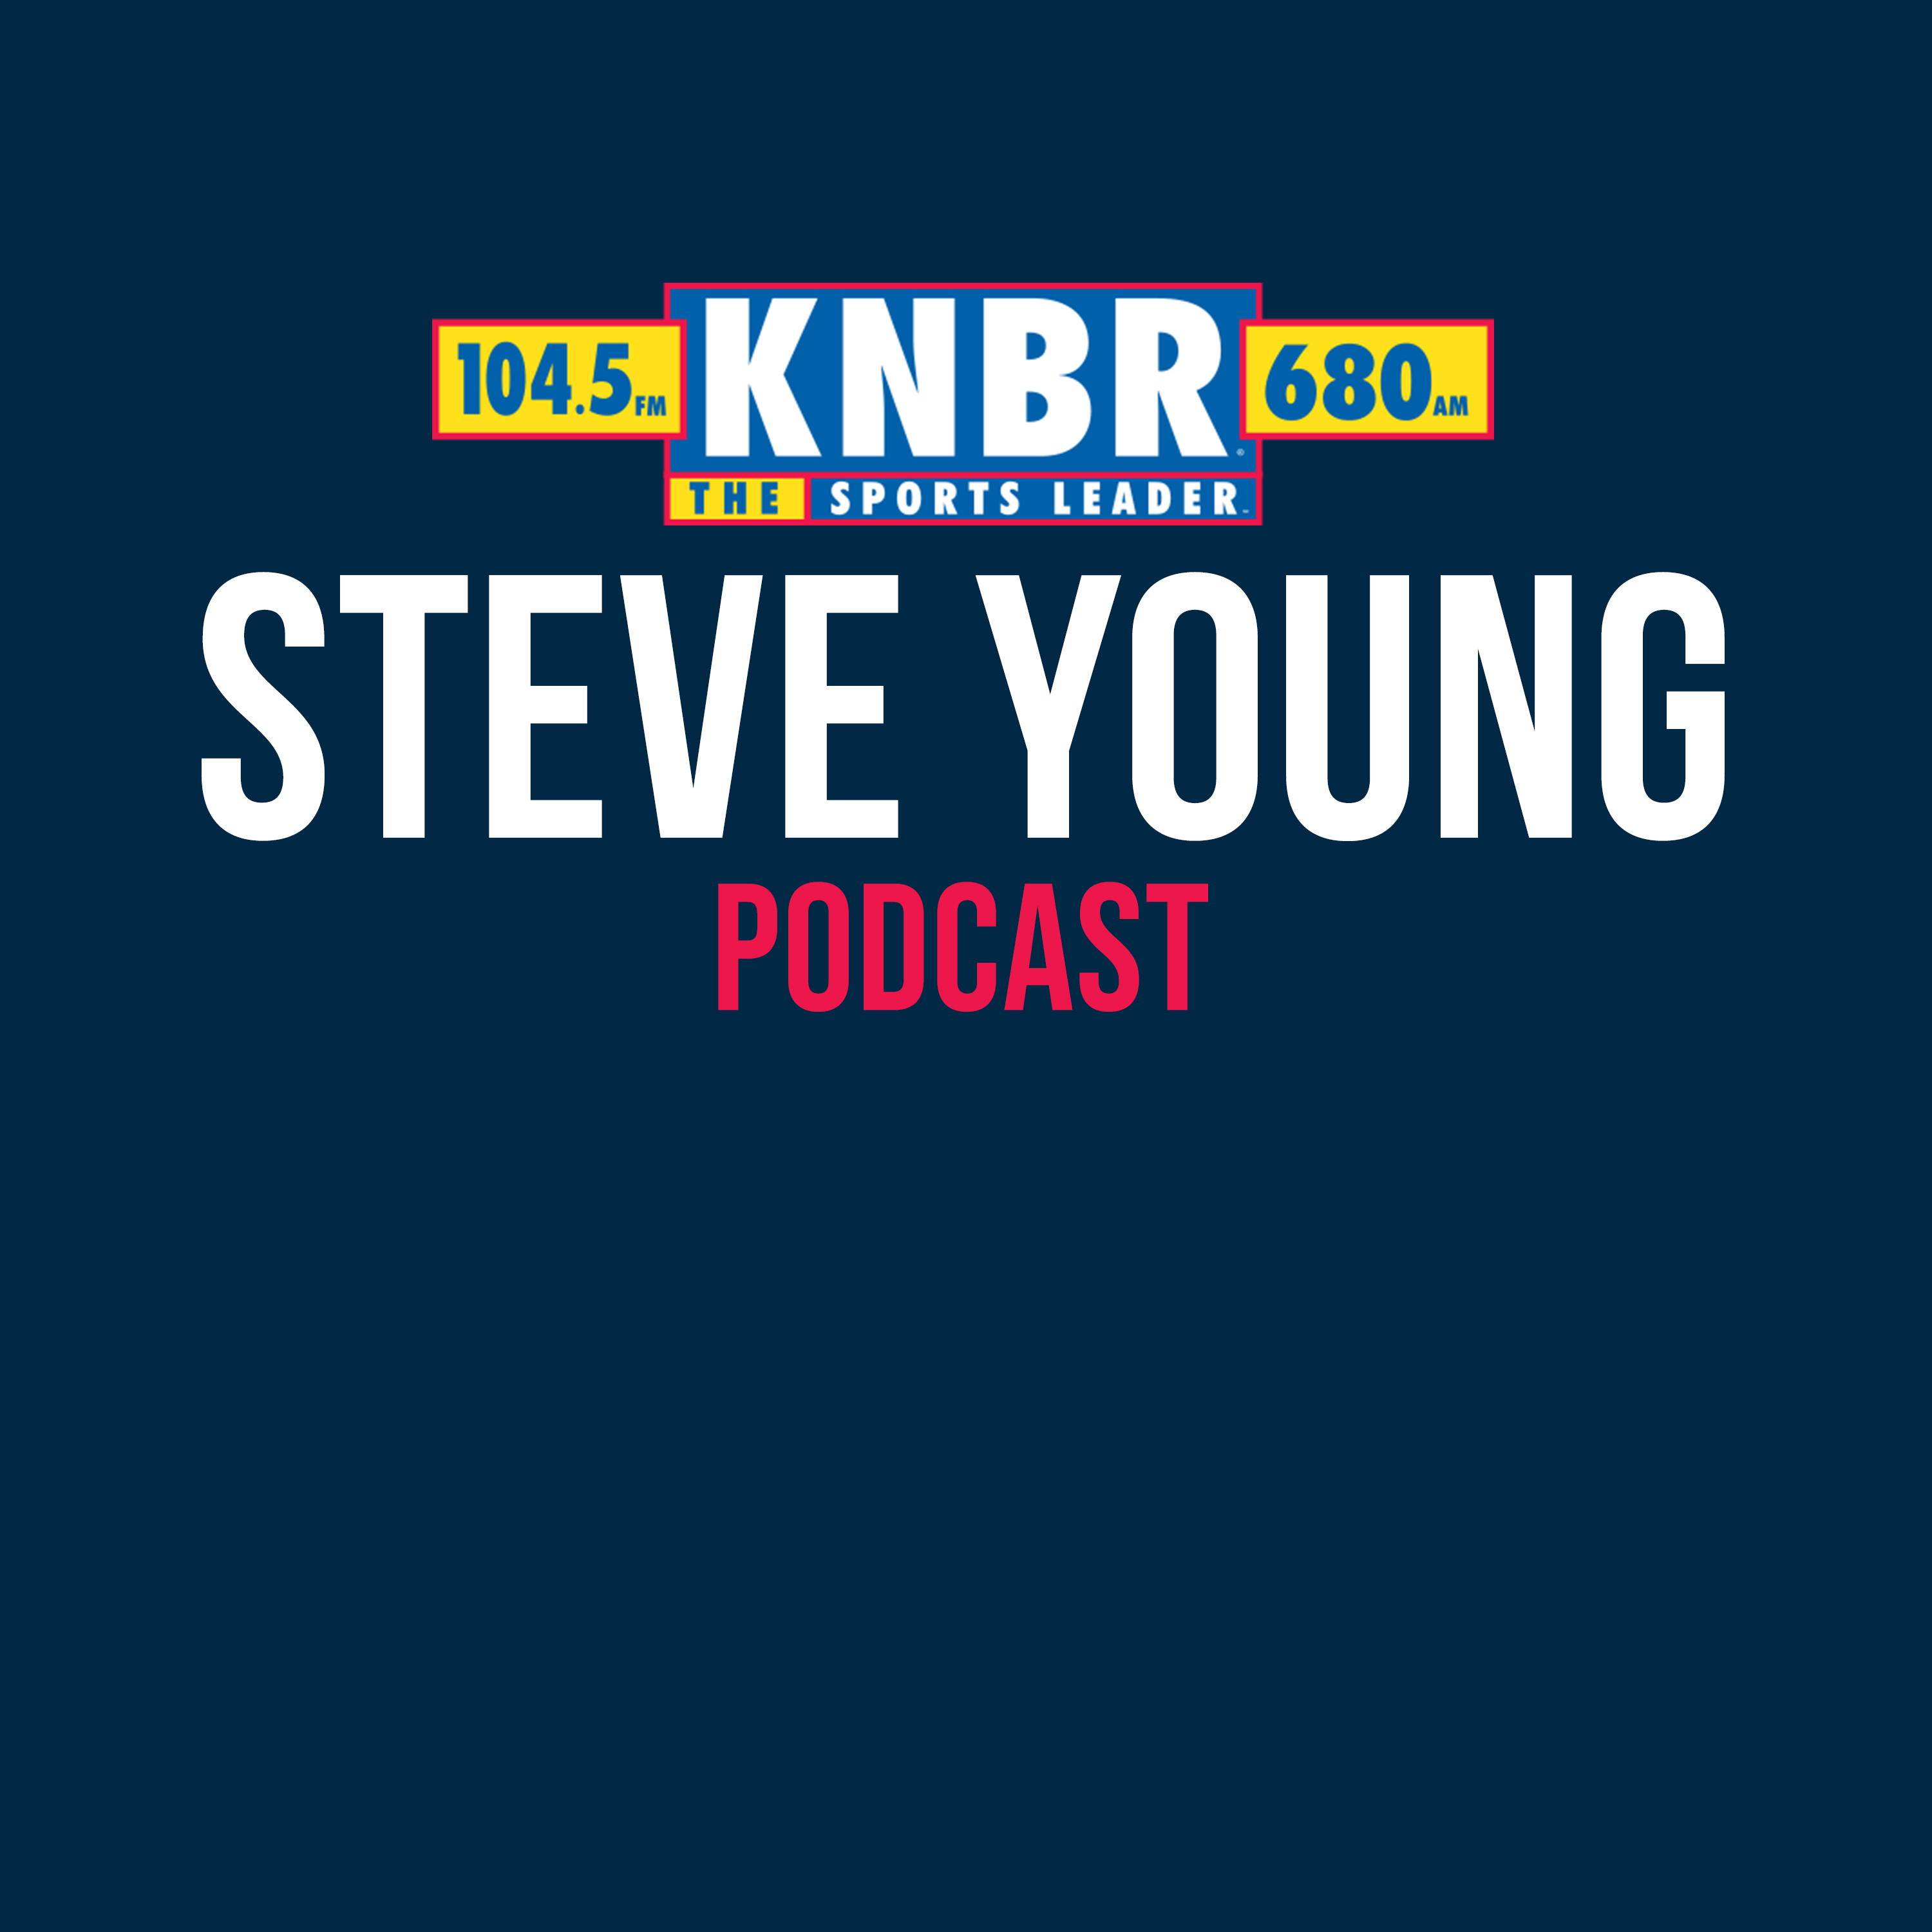 10-12 Steve Young joins Tolbert & Copes to discuss the 49ers win over Carolina, questionable coaching decisions & bad roughing the passer penalties